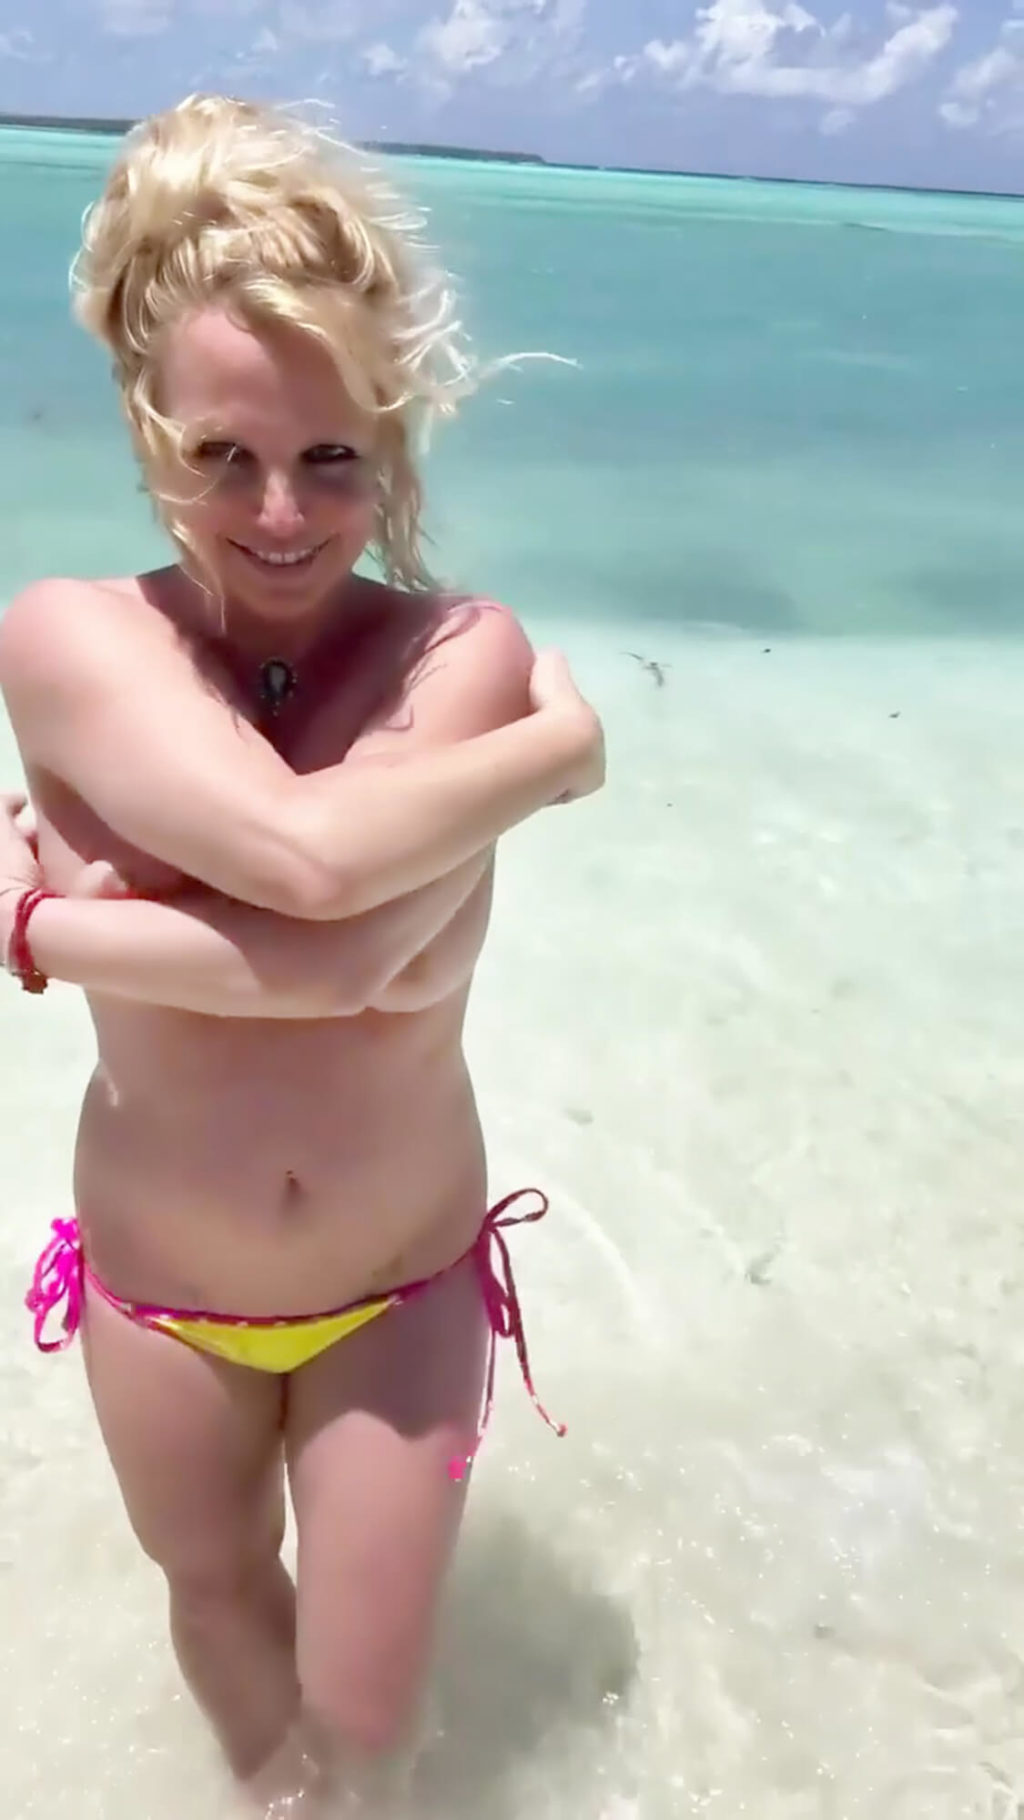 britney spears nude topless 06 1024x1820 - Britney Spears Flashes Her Nude Tits as She Poses Topless on The Beach (14 Enhanced Pics + Video)